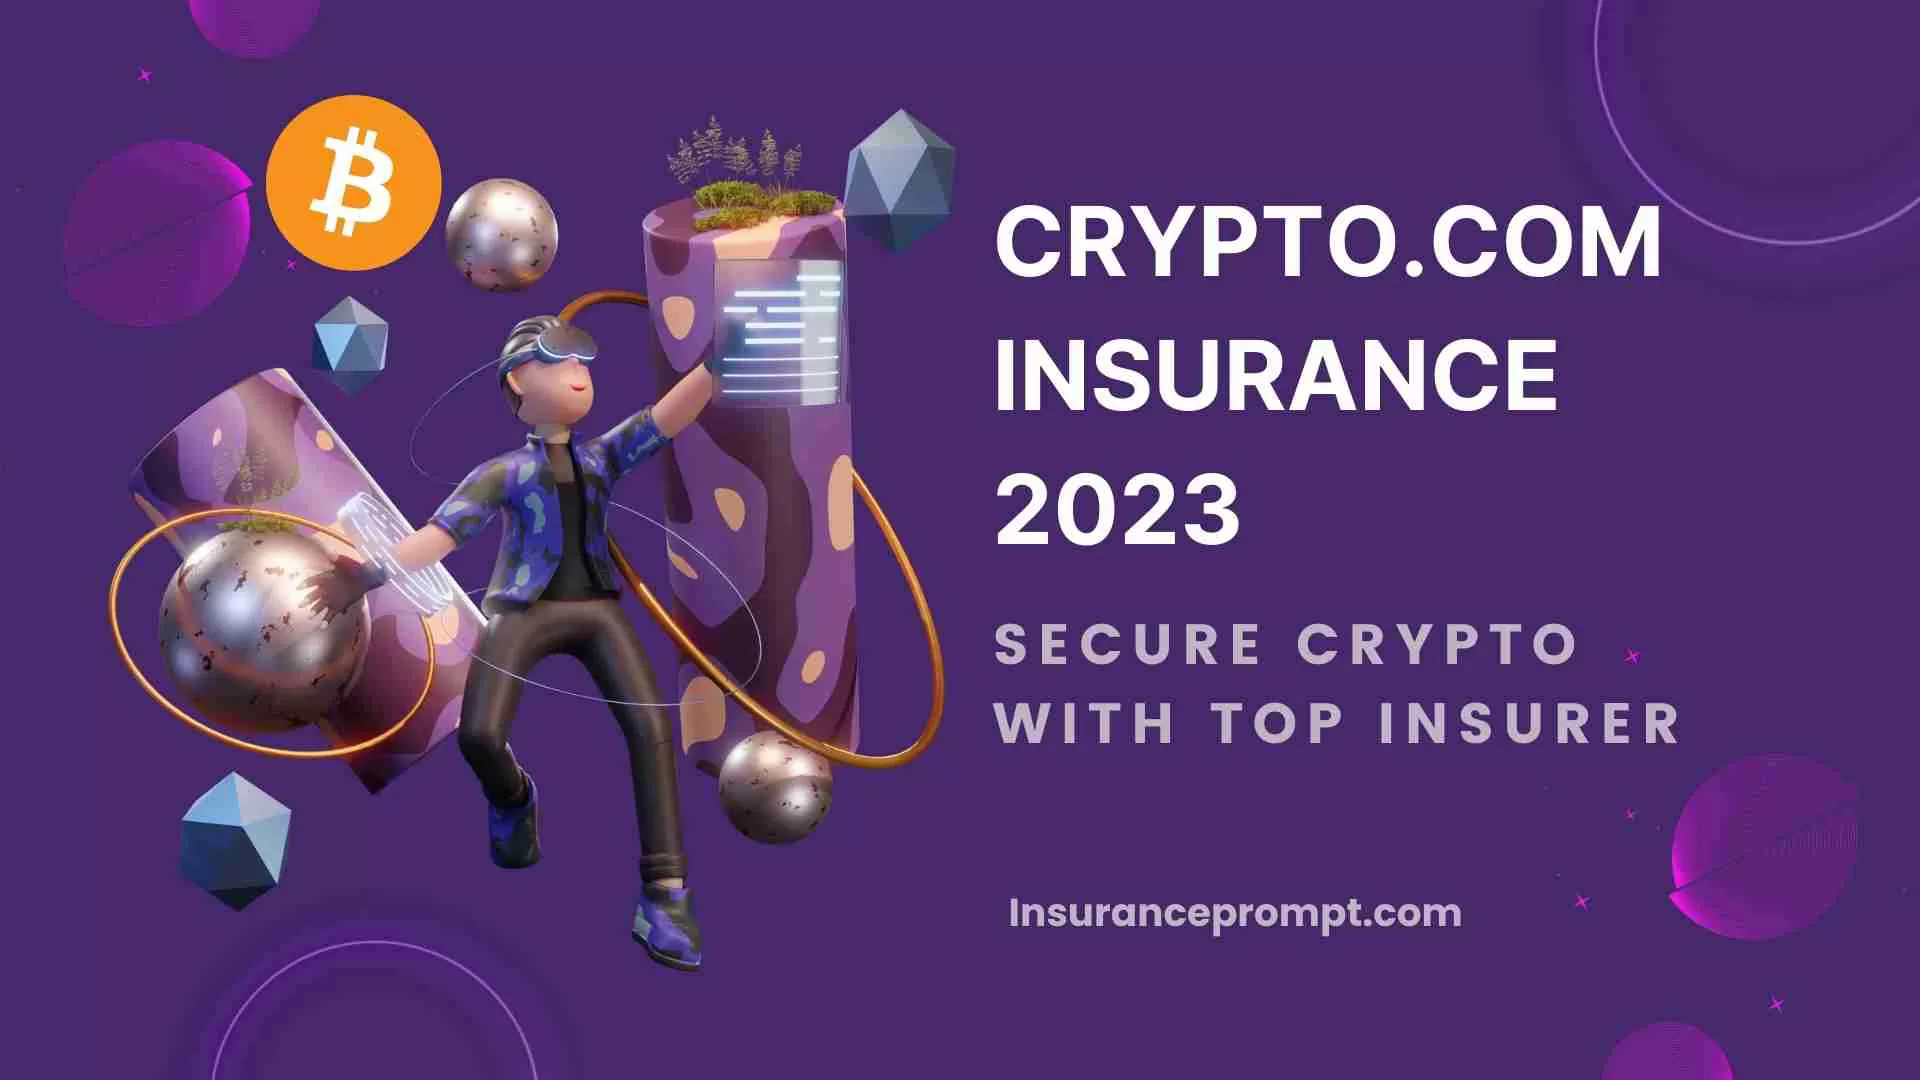 Crypto.com Insurance: Insure Your Digital Wealth In 2023